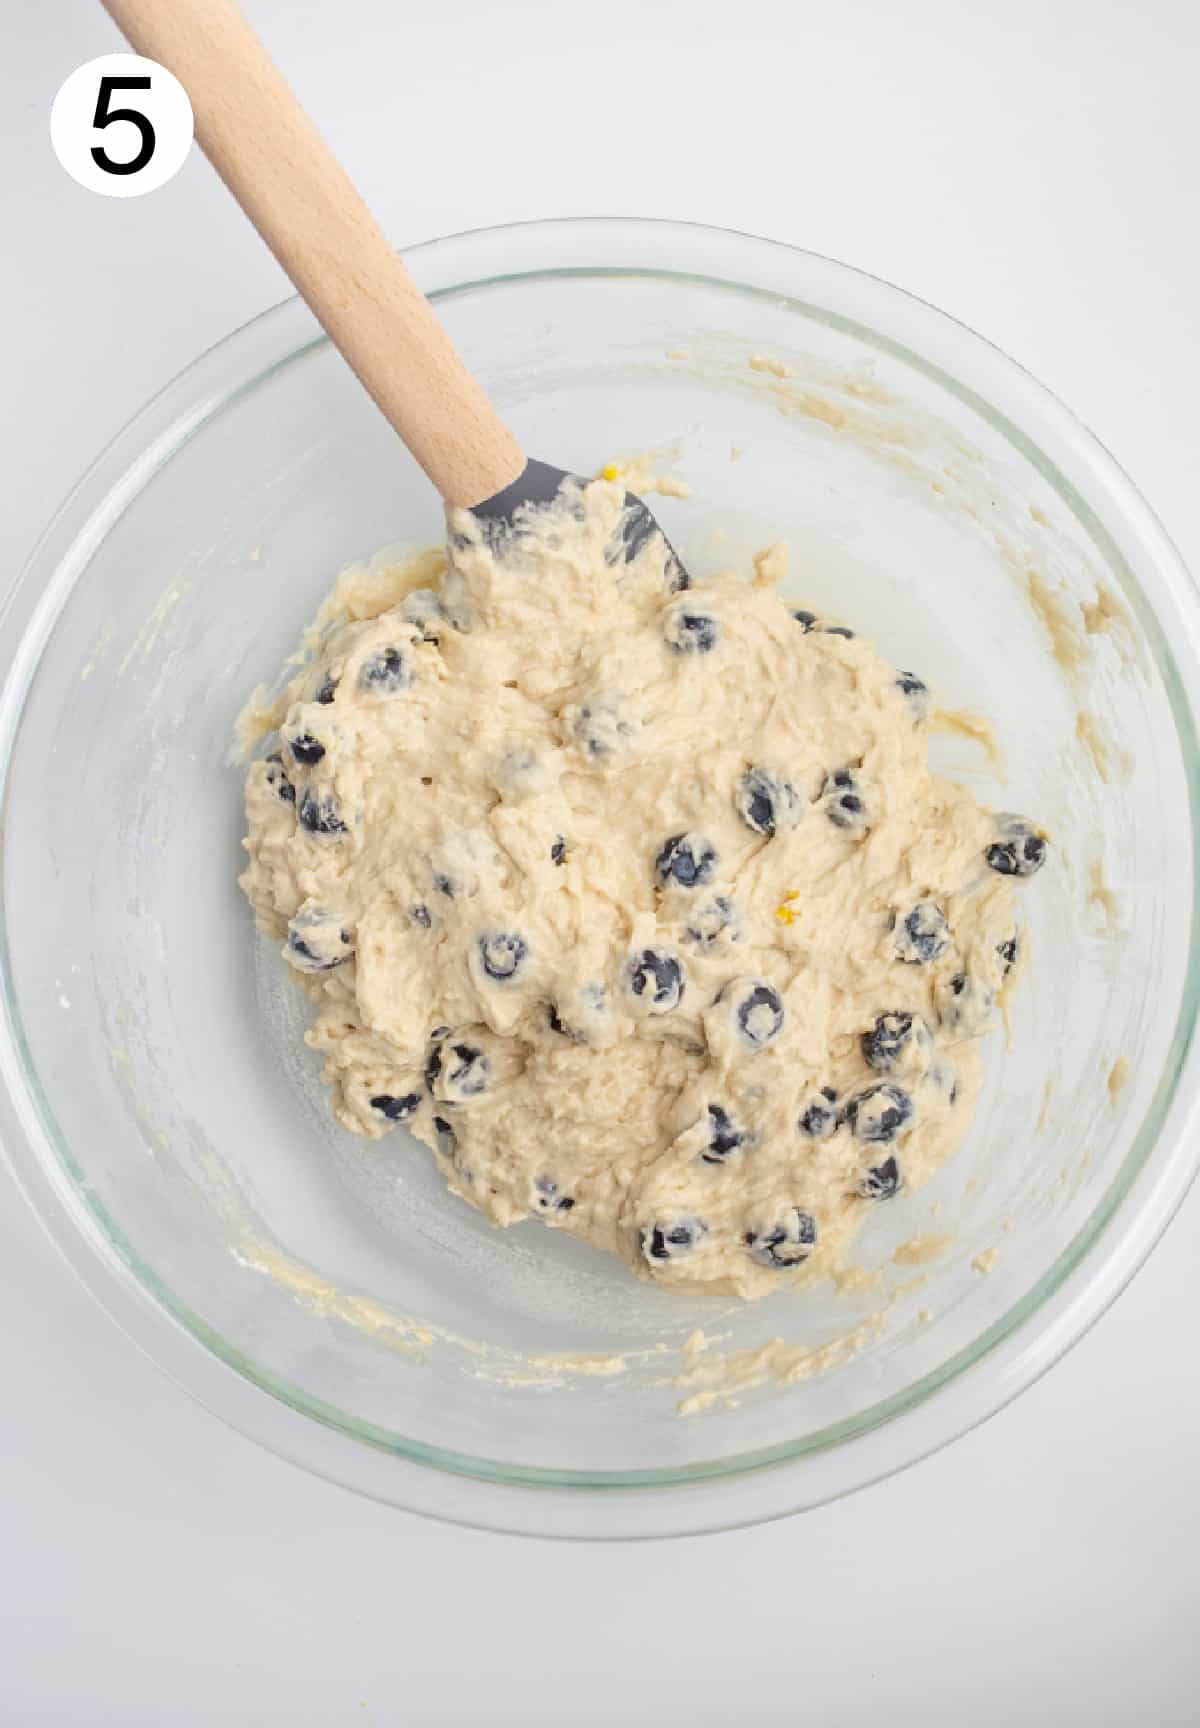 Vegan blueberry muffin batter in a glass bowl.